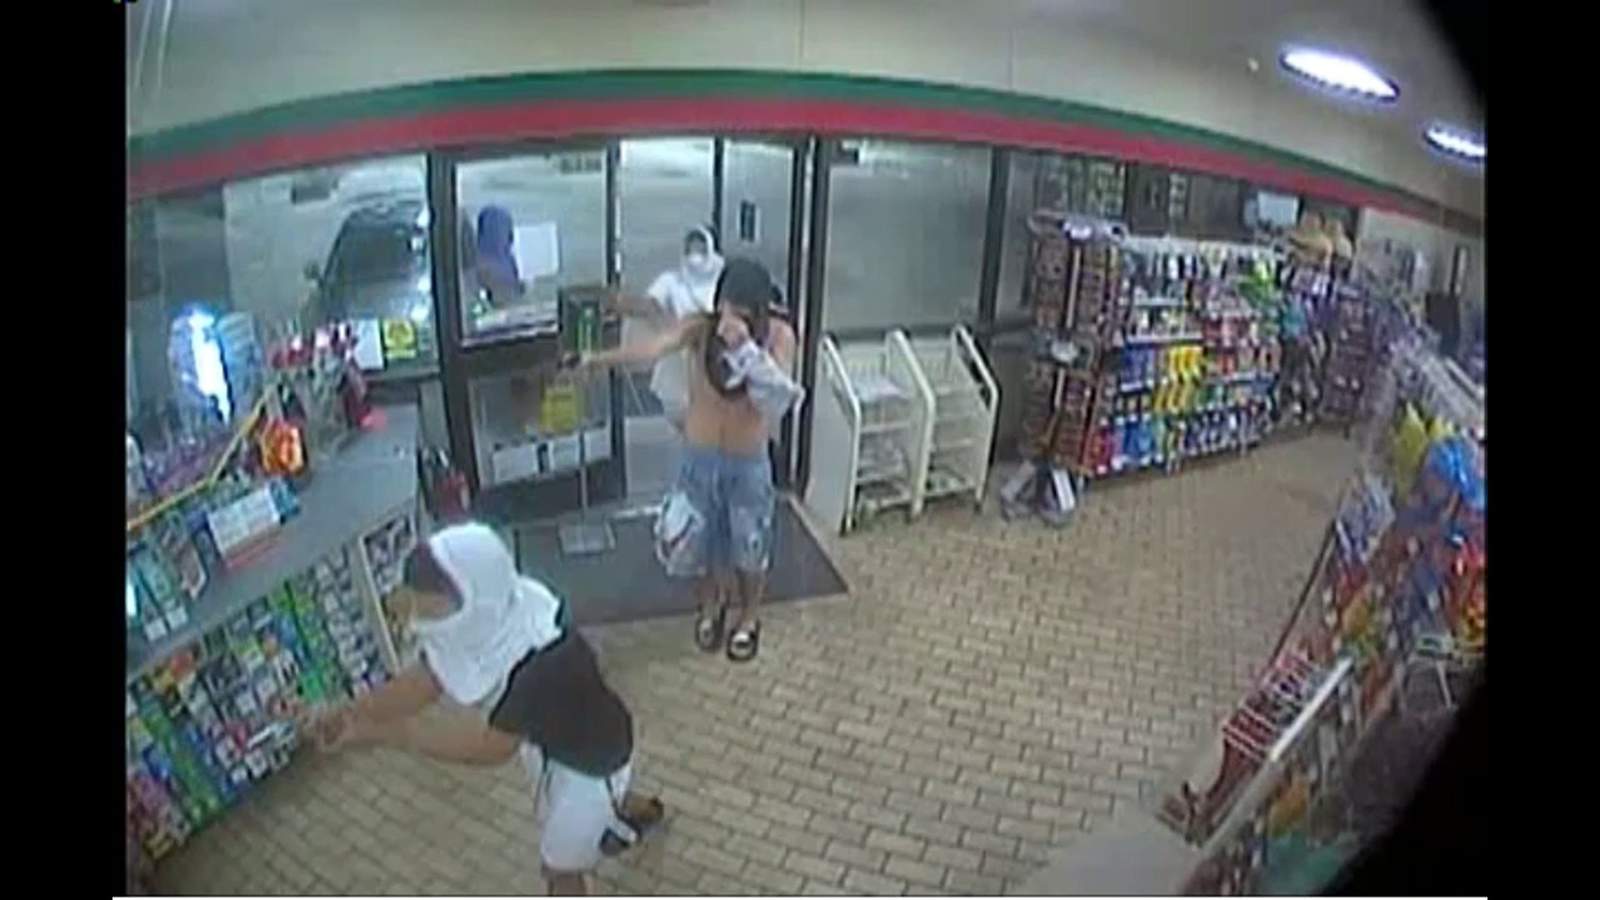 7 teens arrested in Osceola County store robberies, deputies say